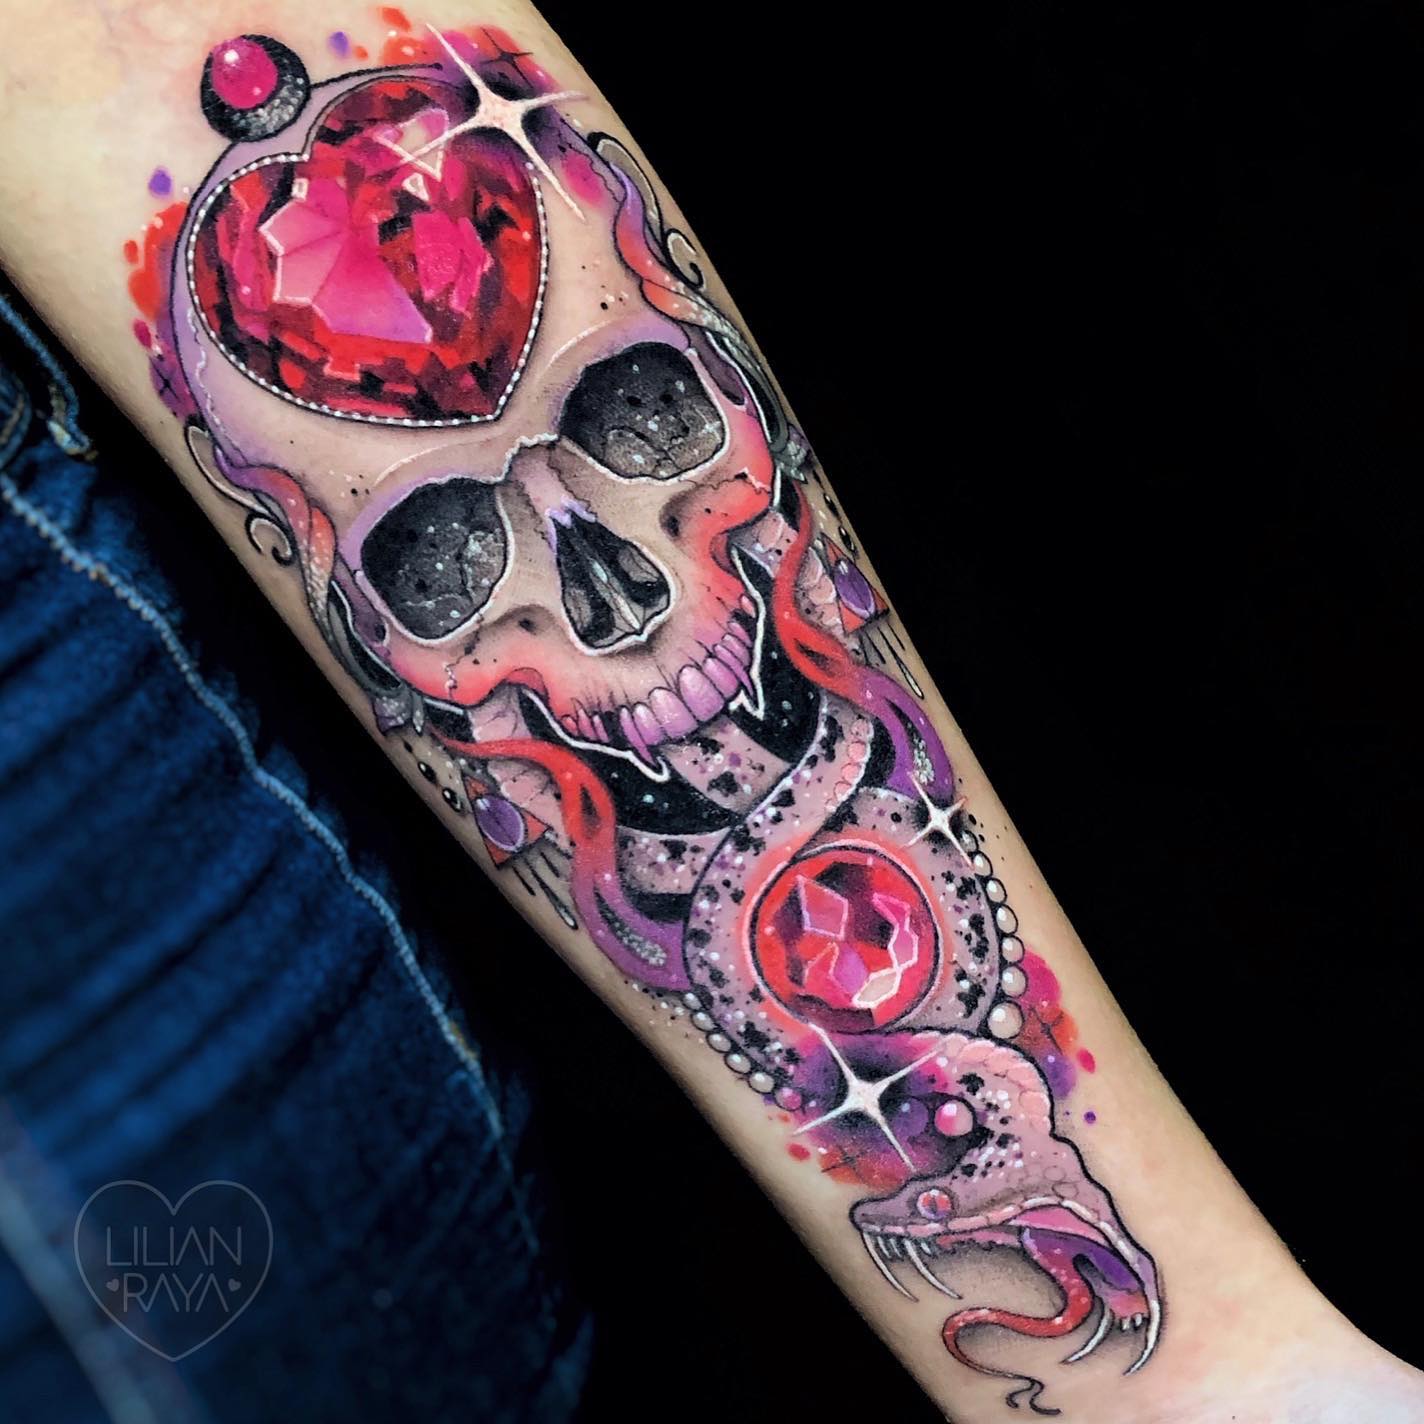 Wanna have a death eater tattoo that is so unique that only a few people have it? Then, go for a pink and purple one. The colors are not the only things that make this tattoo aesthetic big shiny stones are the final touch.